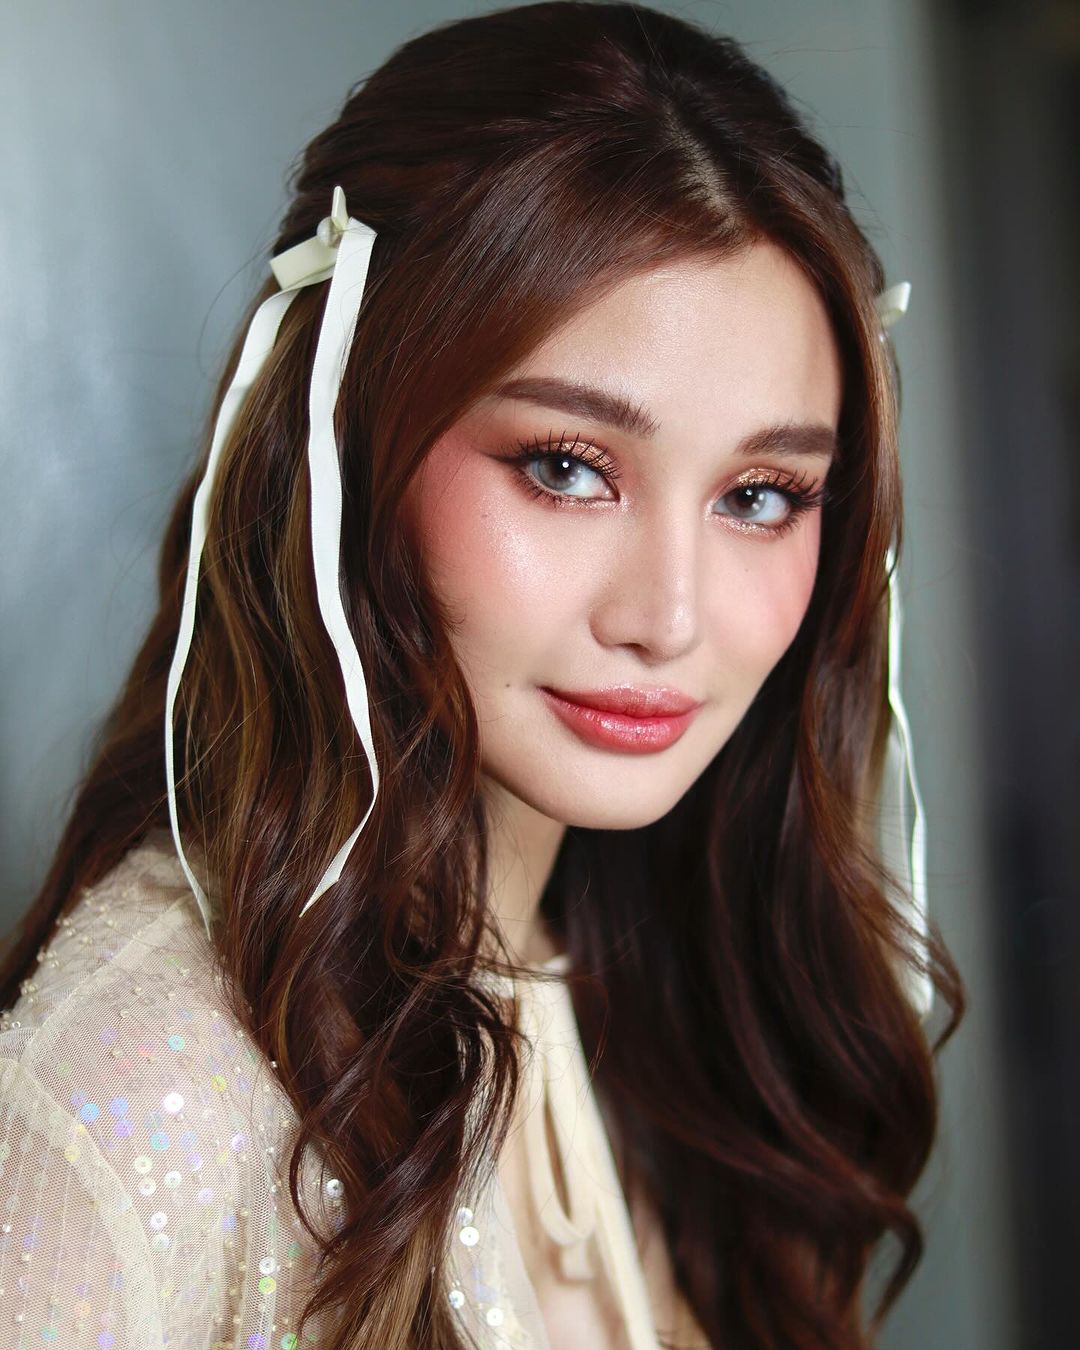 Chie Filomeno's beauty look for ASAP Natin To